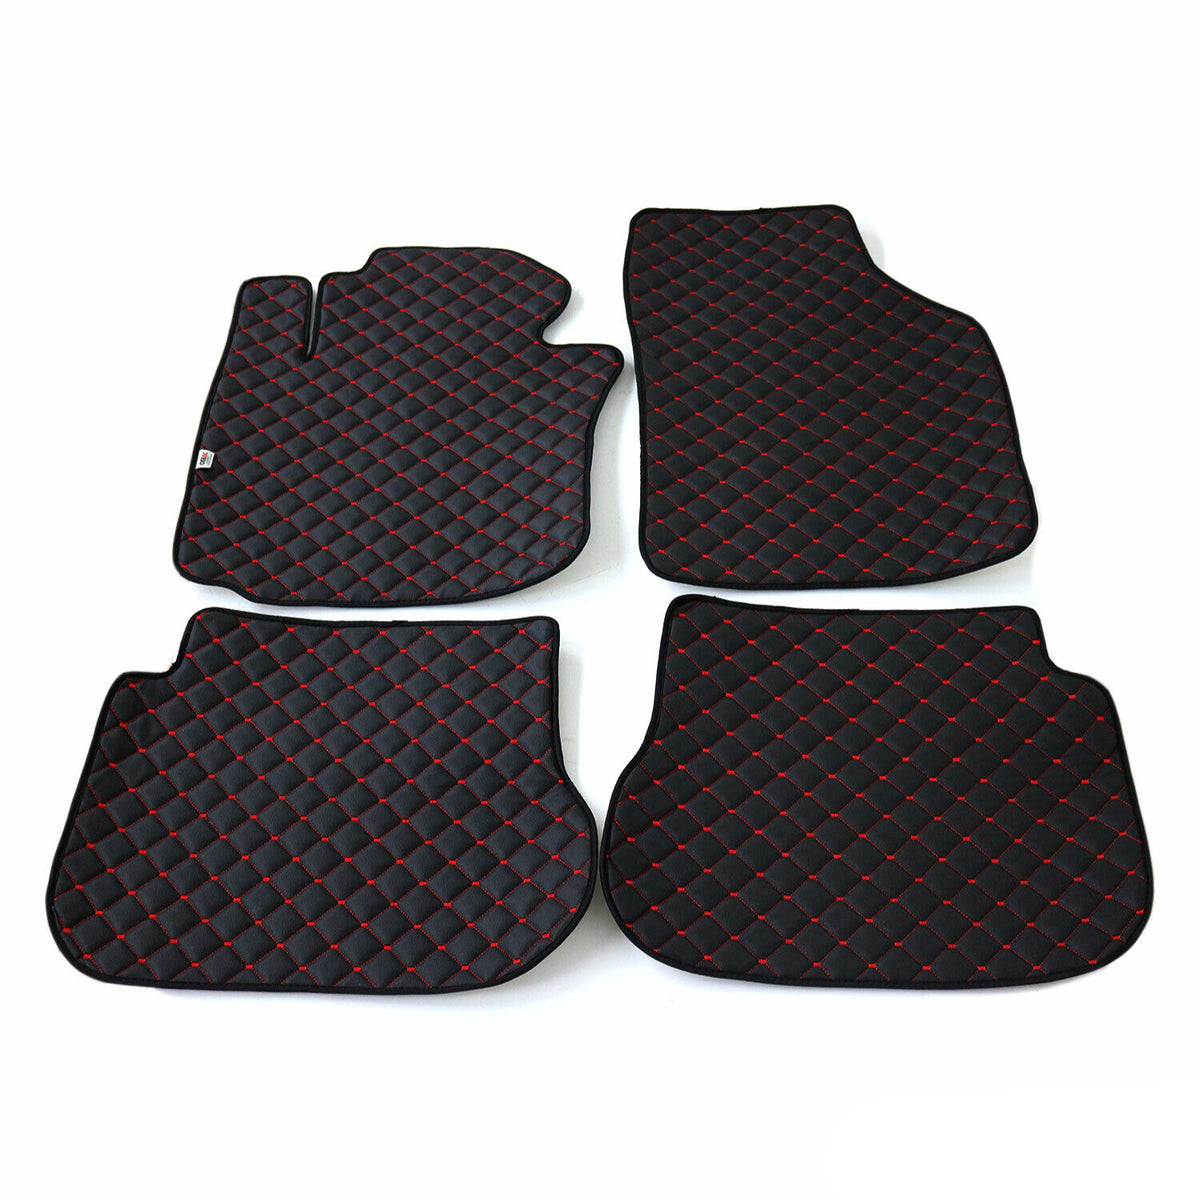 Floor mats leather car mats for VW Caddy 2015-2020 artificial leather black red 4 pieces